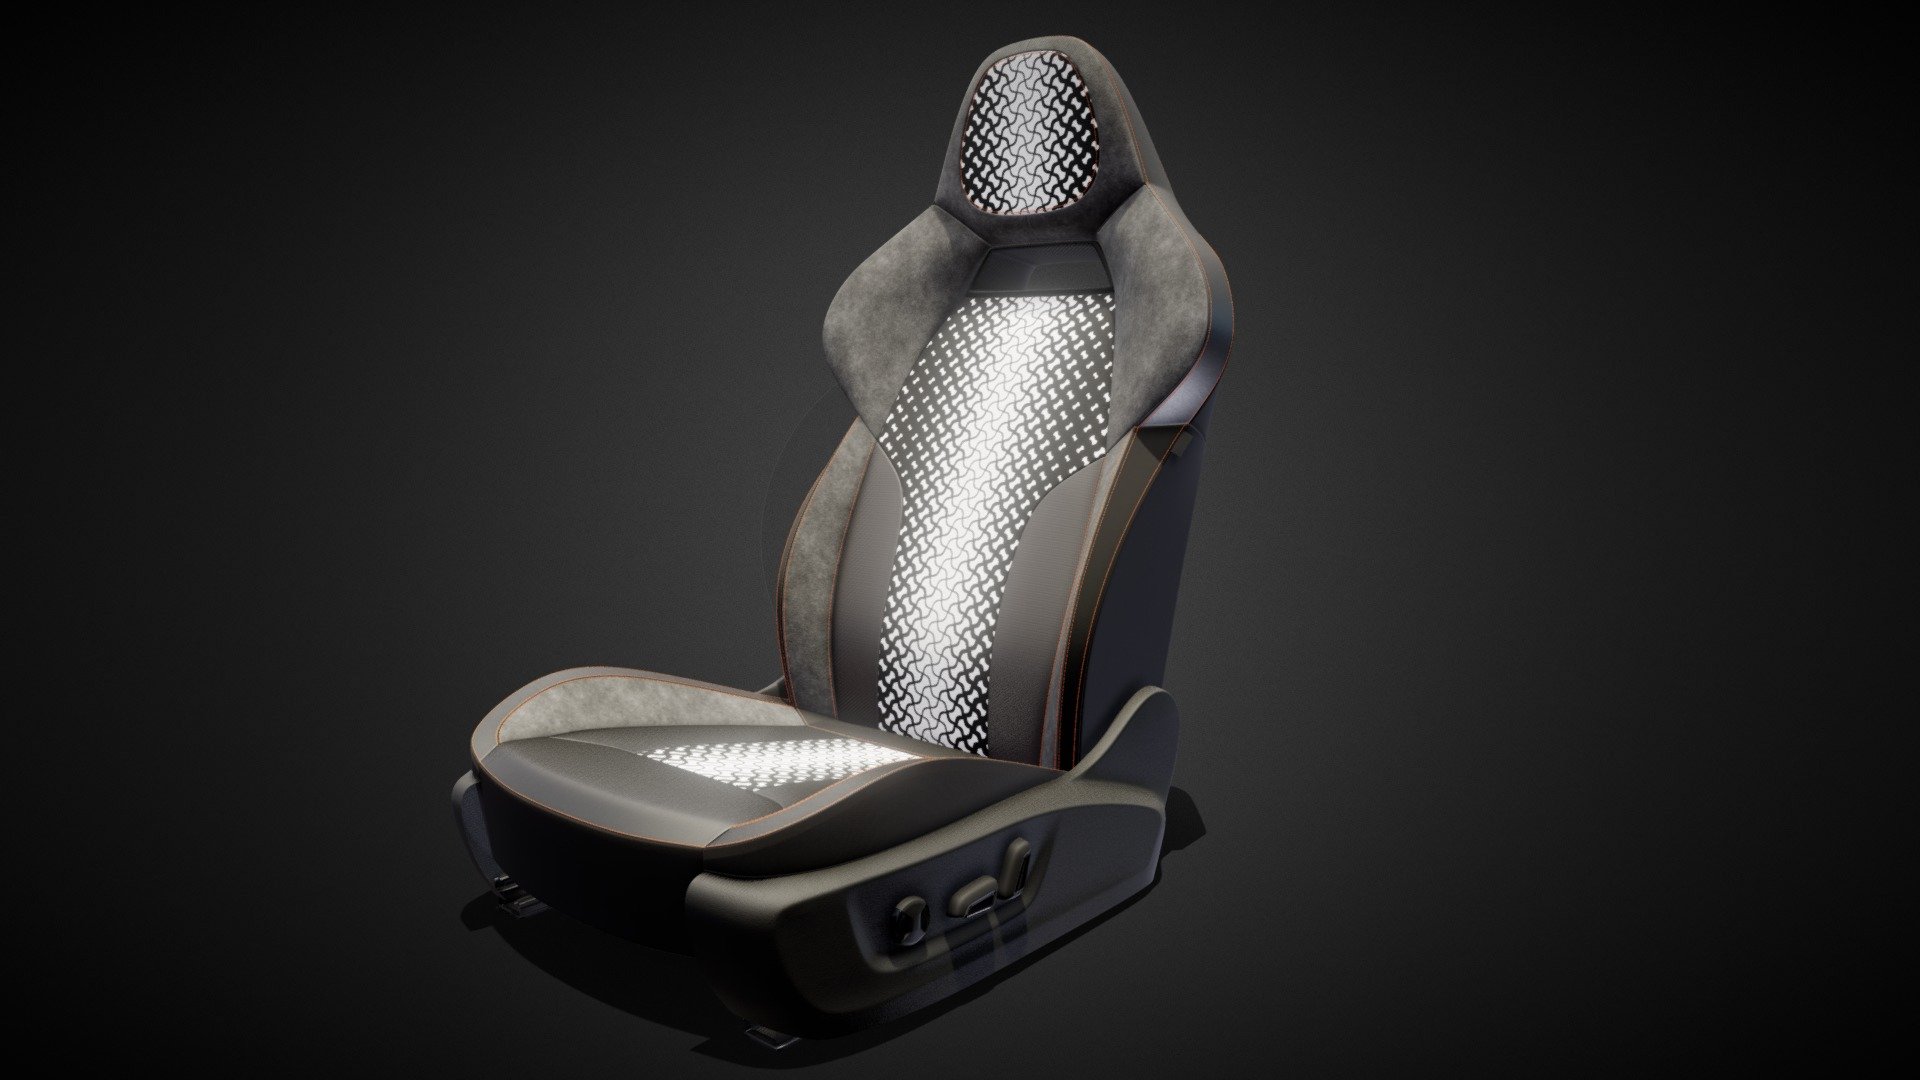 I have here for you a very detailed model of the seat from the Skoda Kamiq. The model is suitable for visualizations and for planned retopo for games 3d model